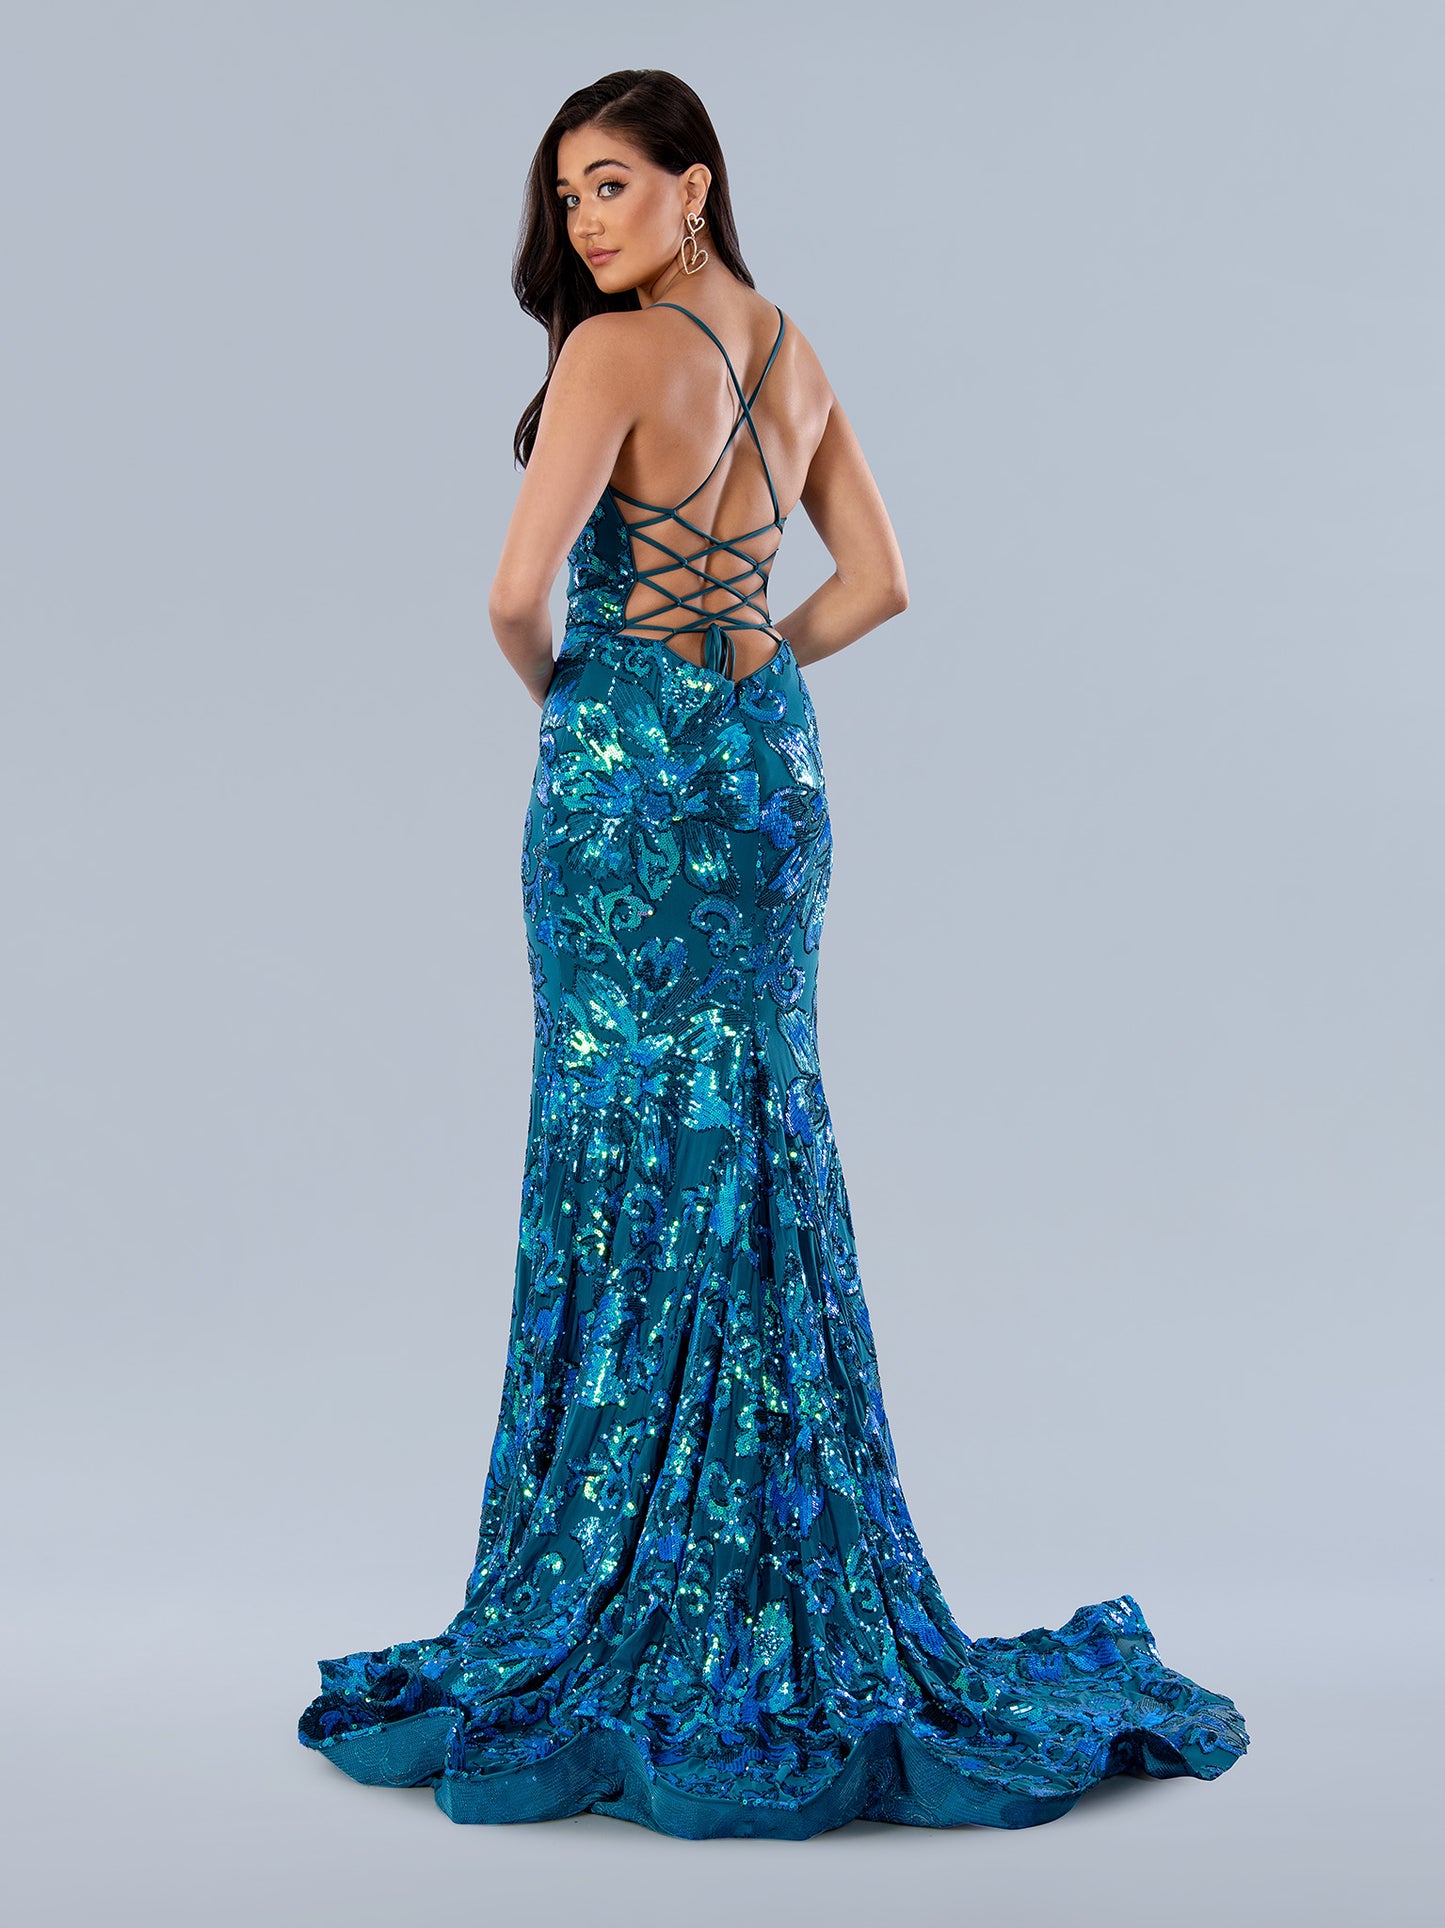 Look stunning in this Stella Couture 24239 Sequin Floral Fitted Mermaid Backless Prom Dress featuring a figure-hugging corset bodice and a beautiful mermaid skirt with sparkling sequins and floral details. The backless design and V-neckline add an elegant touch to this perfect garment for any special event.  Sizes: Blue  Colors: 0-16